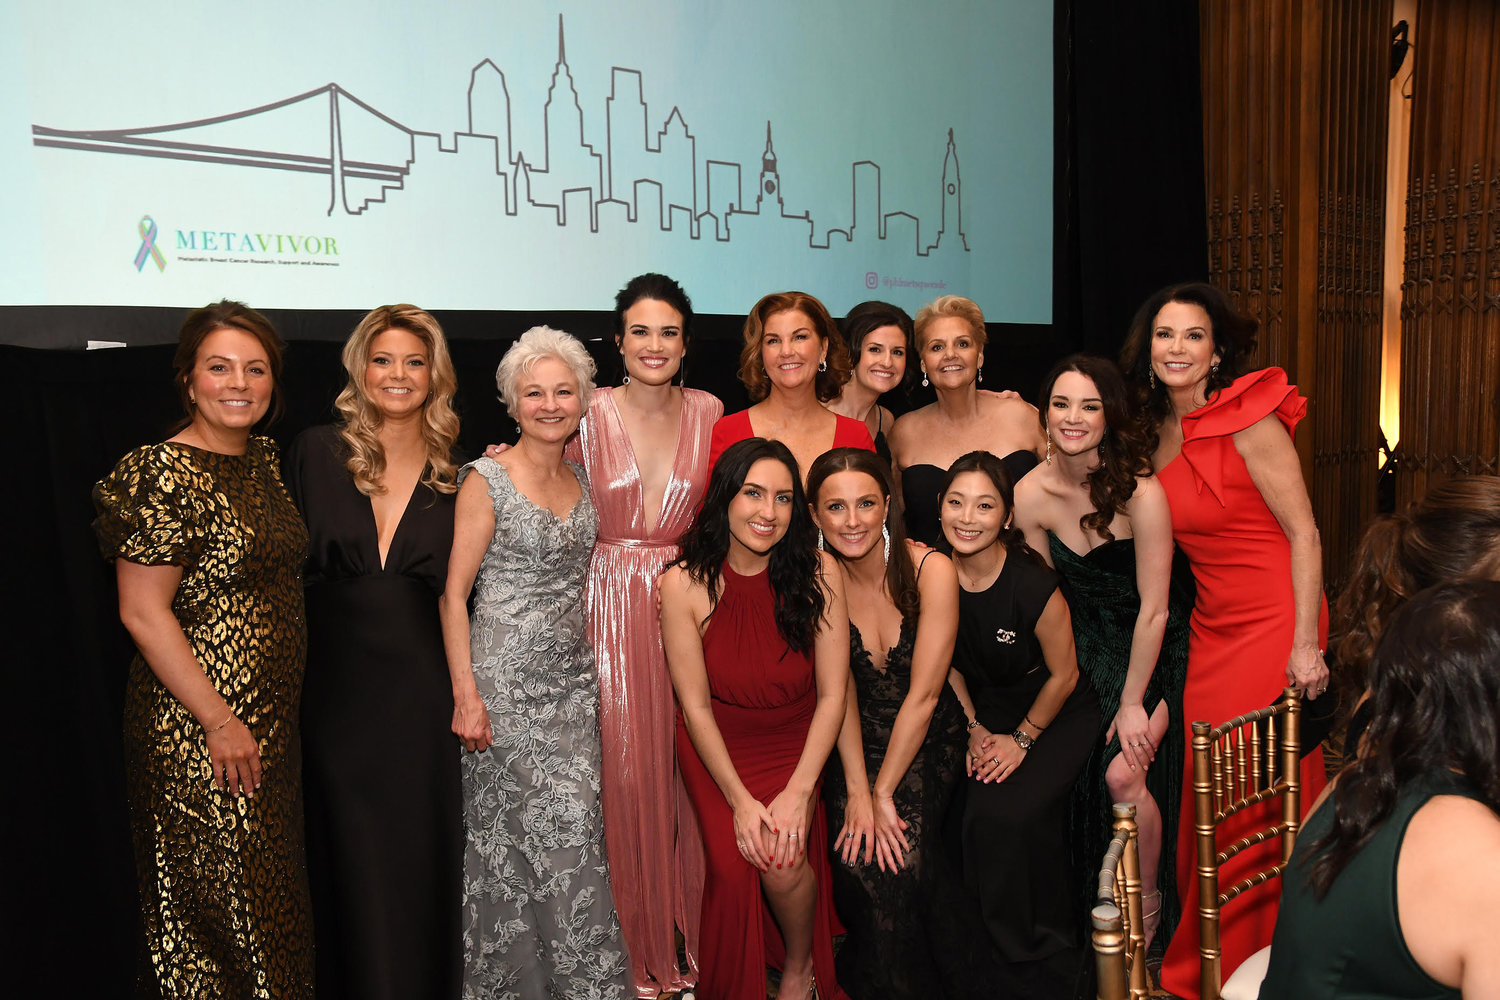 The first annual Philadelphia Metsquerade Gala committee. The event, organized by Kerry O’Riordan McAdam and a host of cousins and aunts, raised support for METAvivor, an organization that funds metastatic breast cancer research.